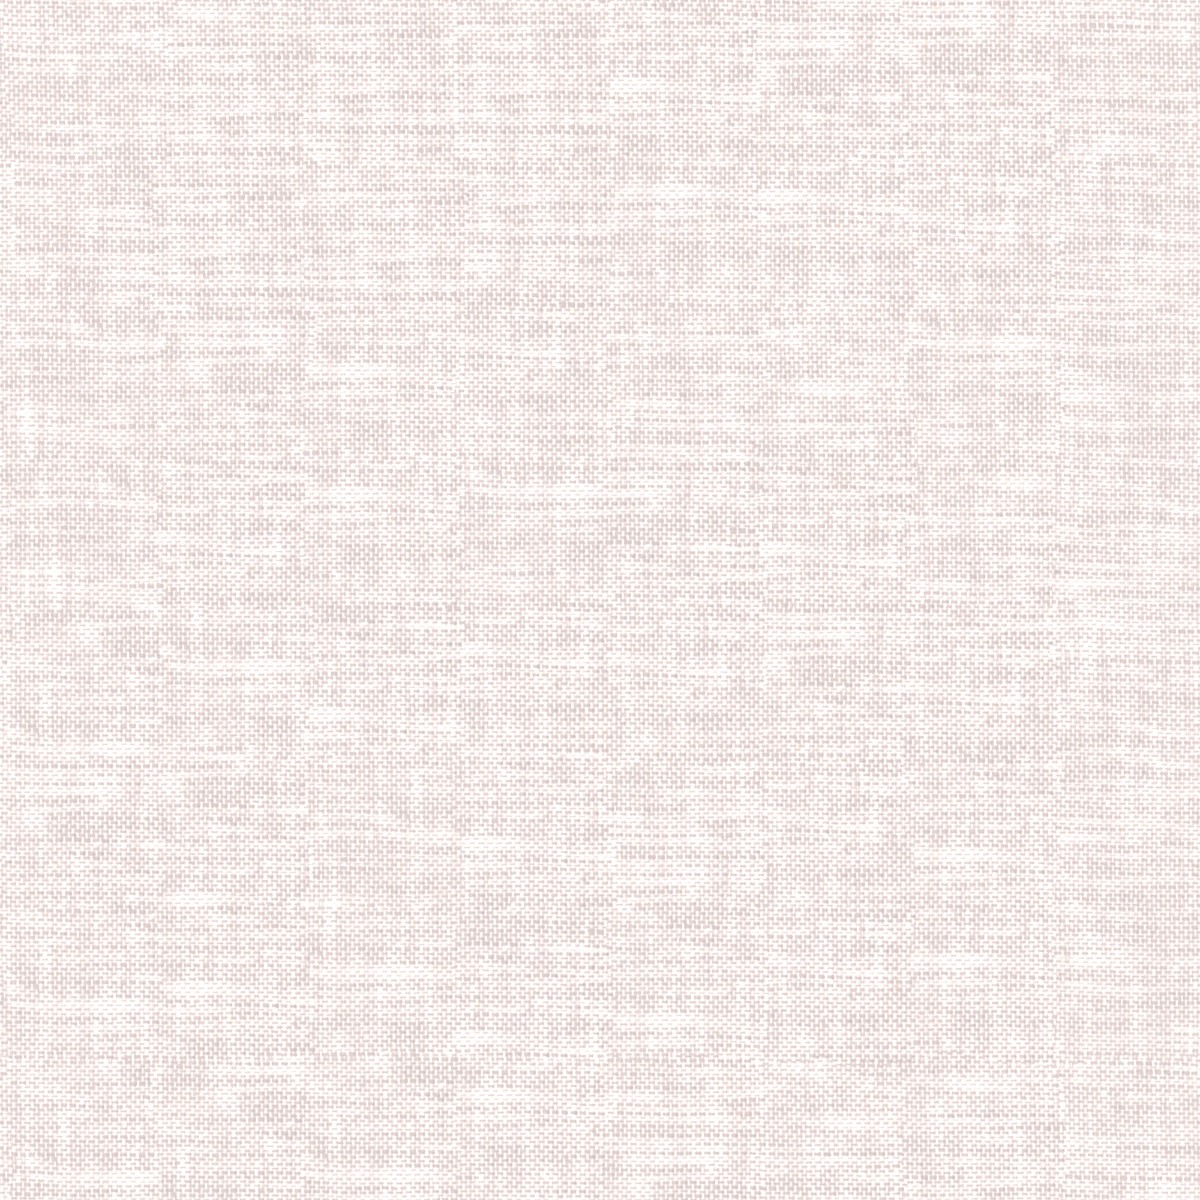 A seamless fabric texture with plain pink sheer units arranged in a None pattern